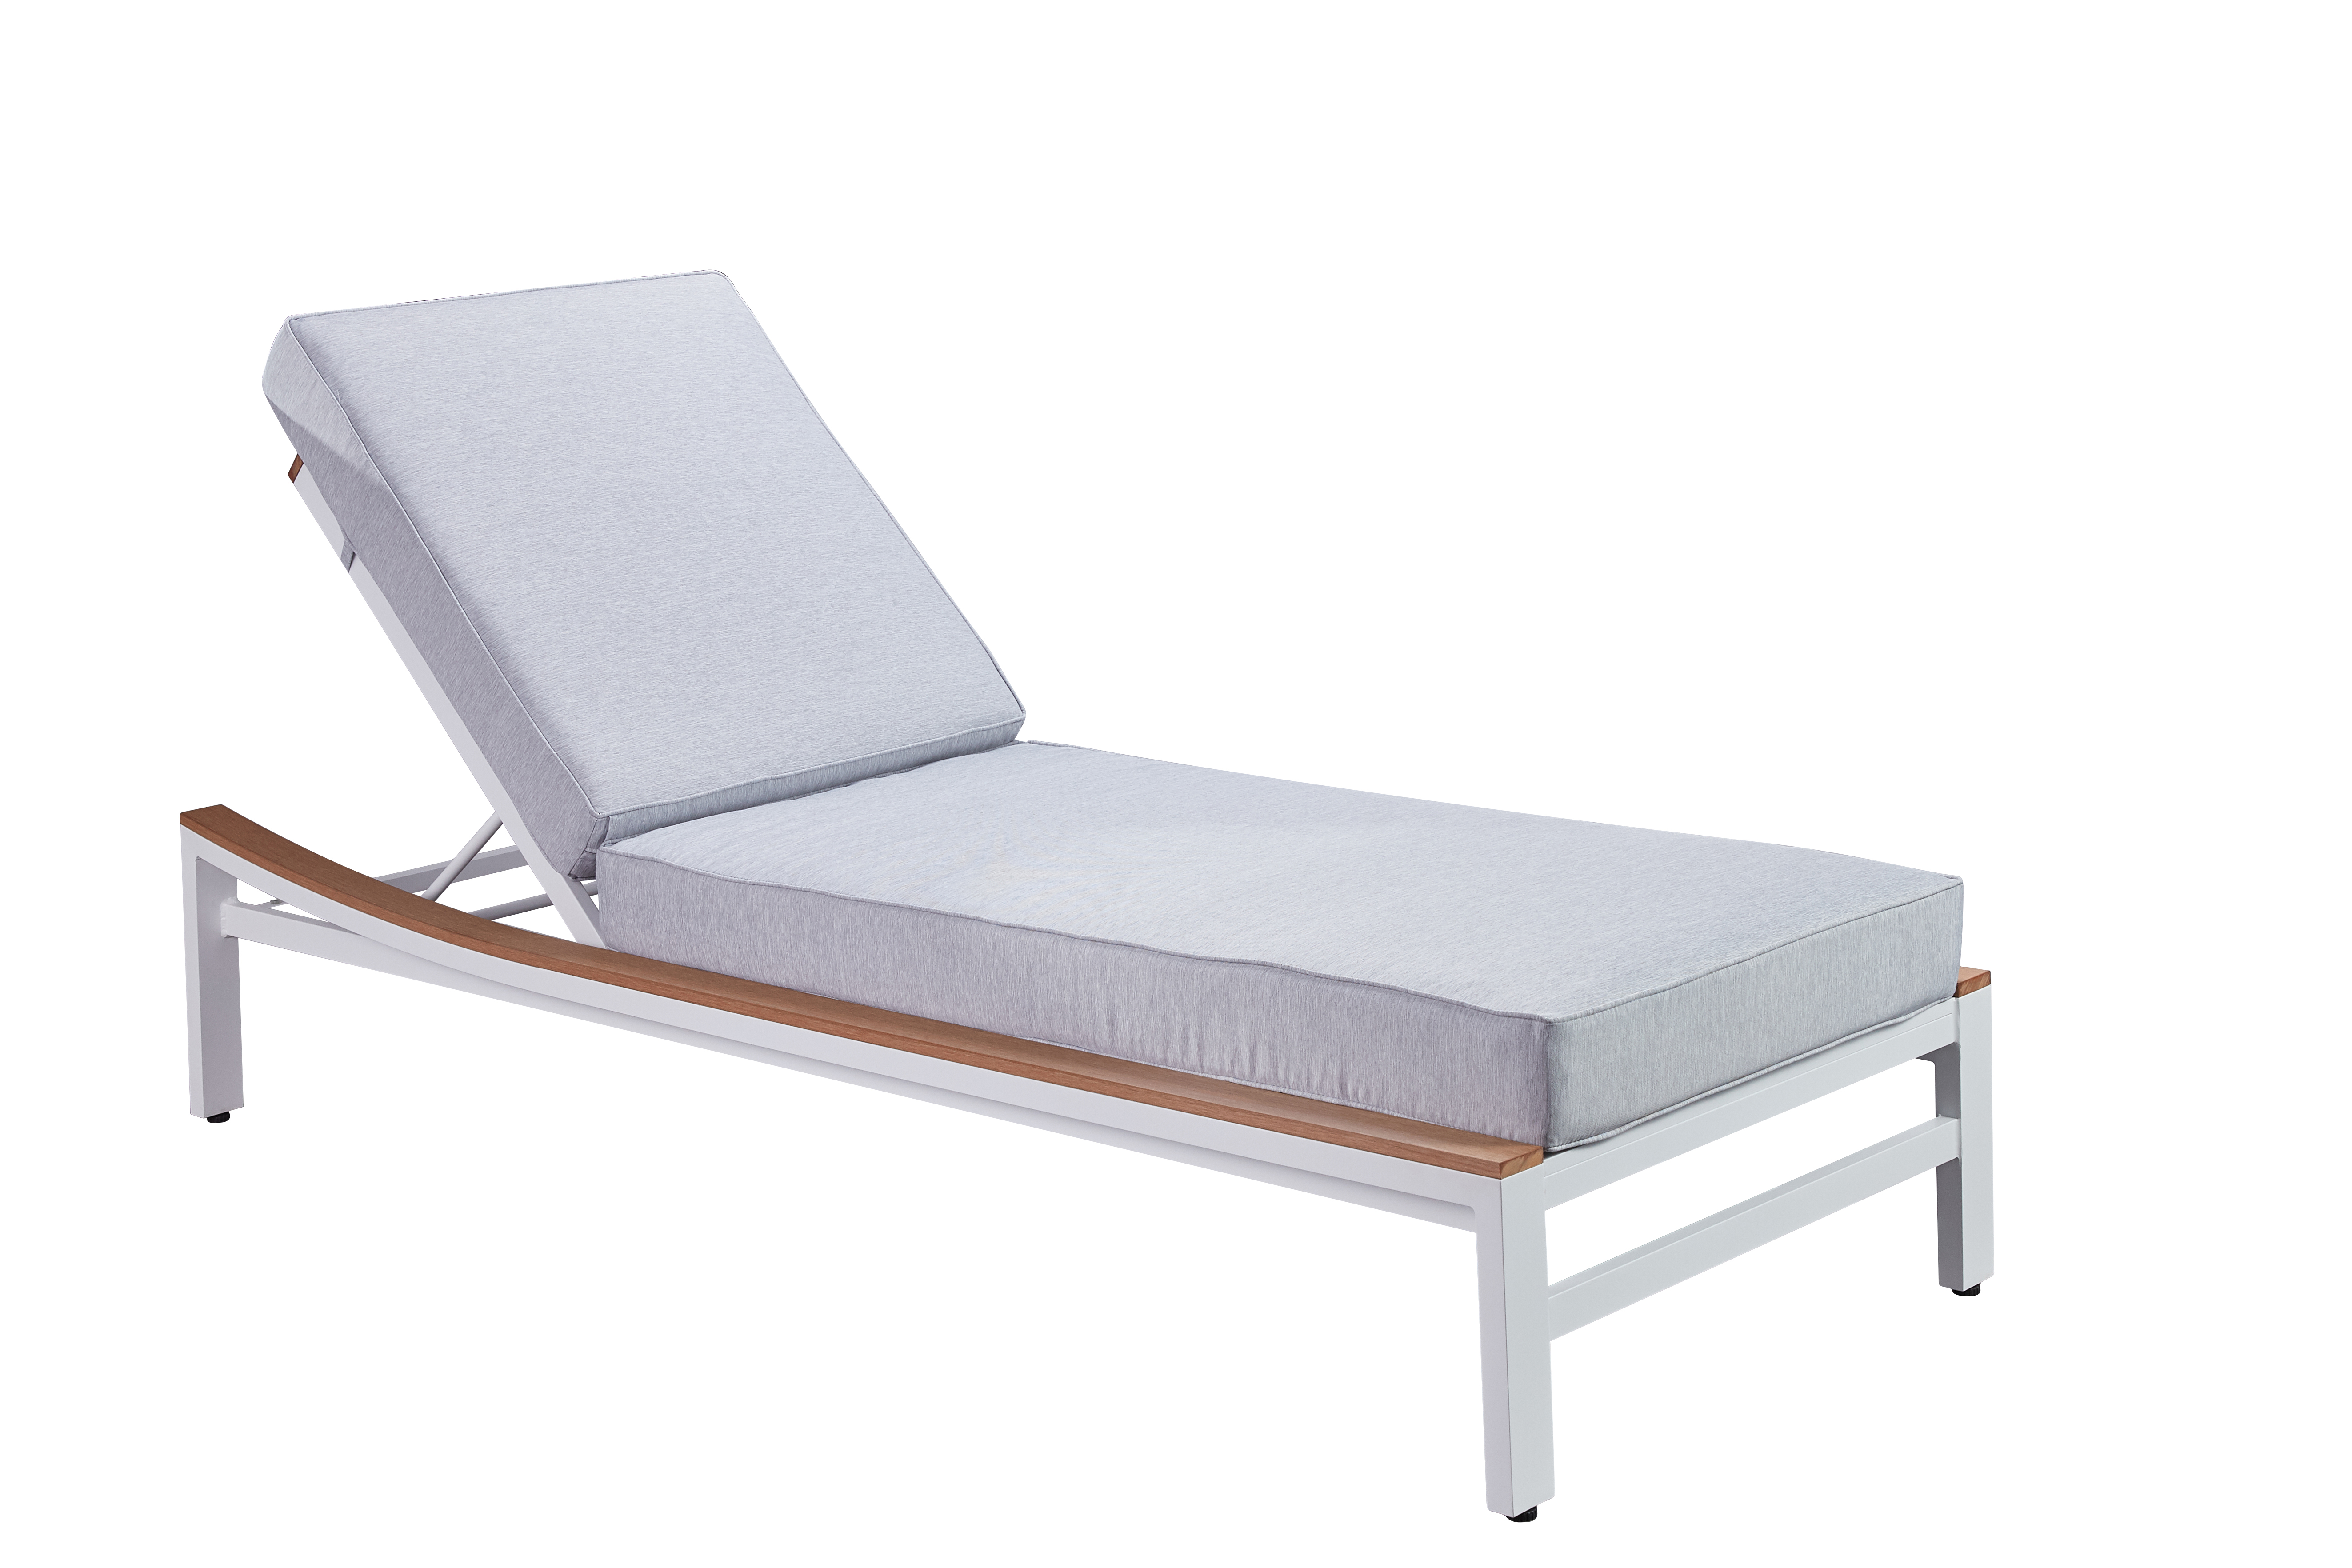 Cheapest Outdoor Patio Furniture Polymer Chaise Lounge Wholesale Price